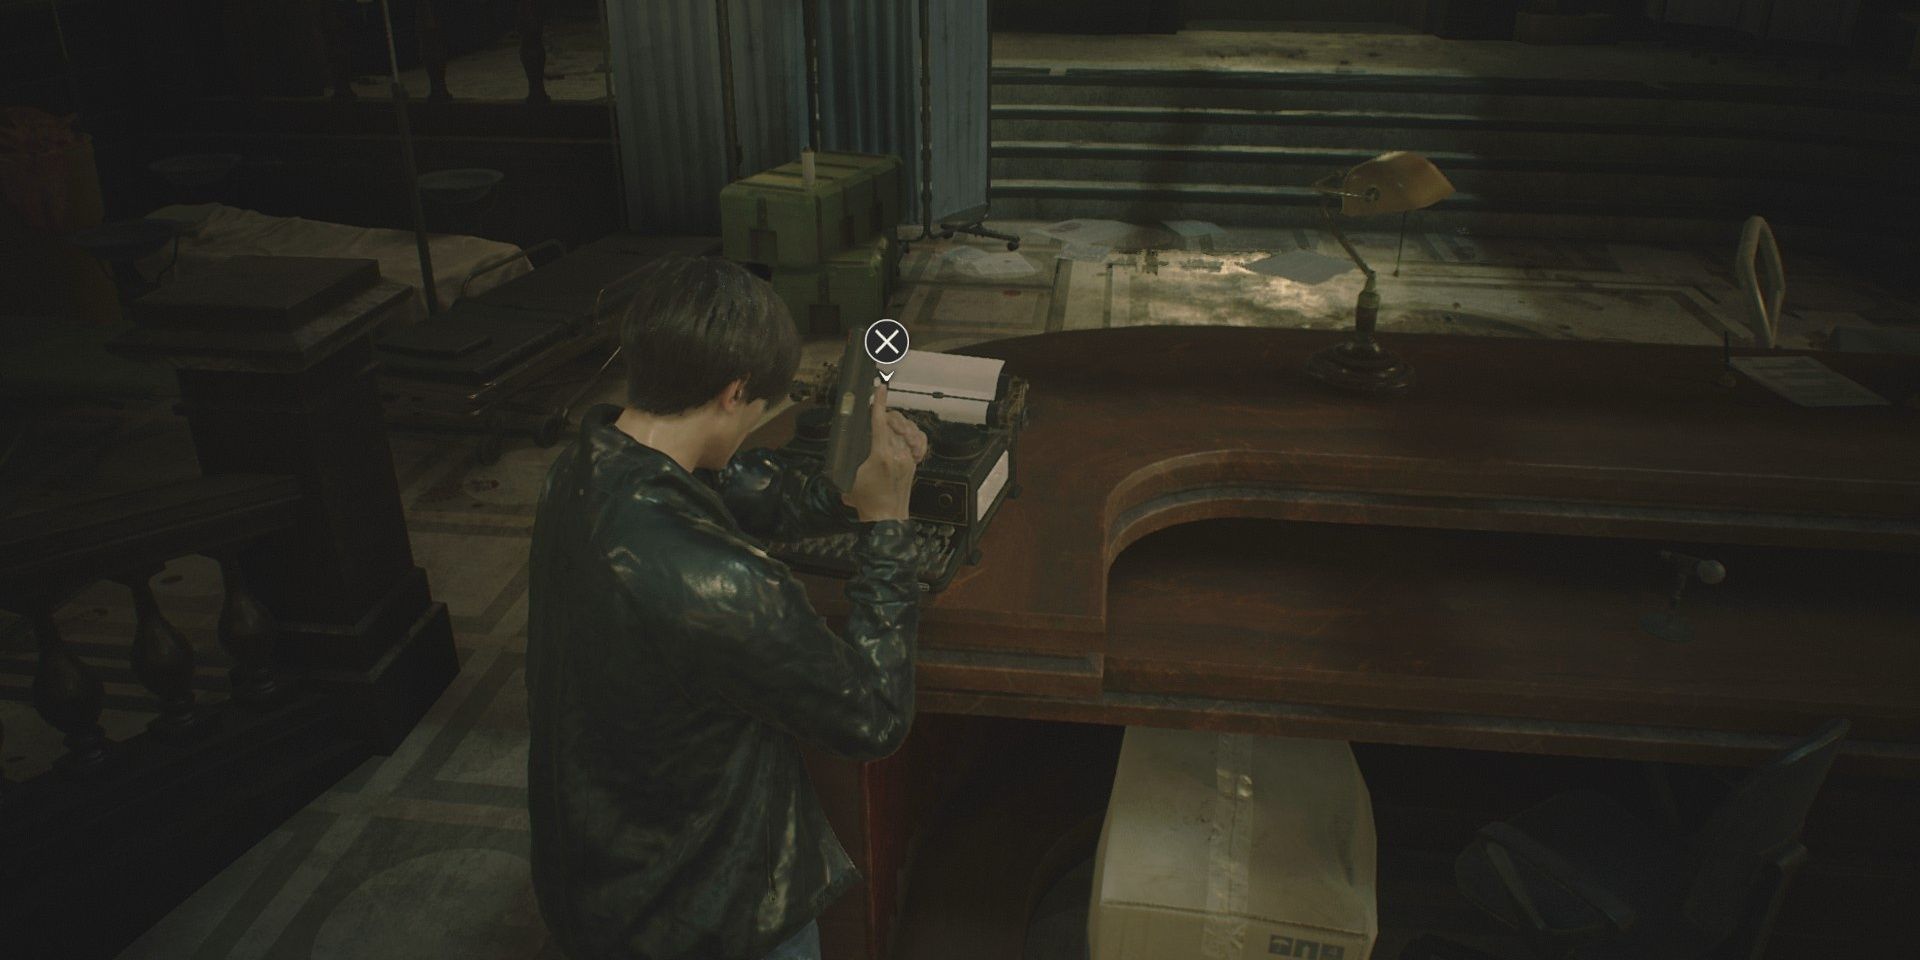 Leon next to a typewriter in Resident Evil 2 